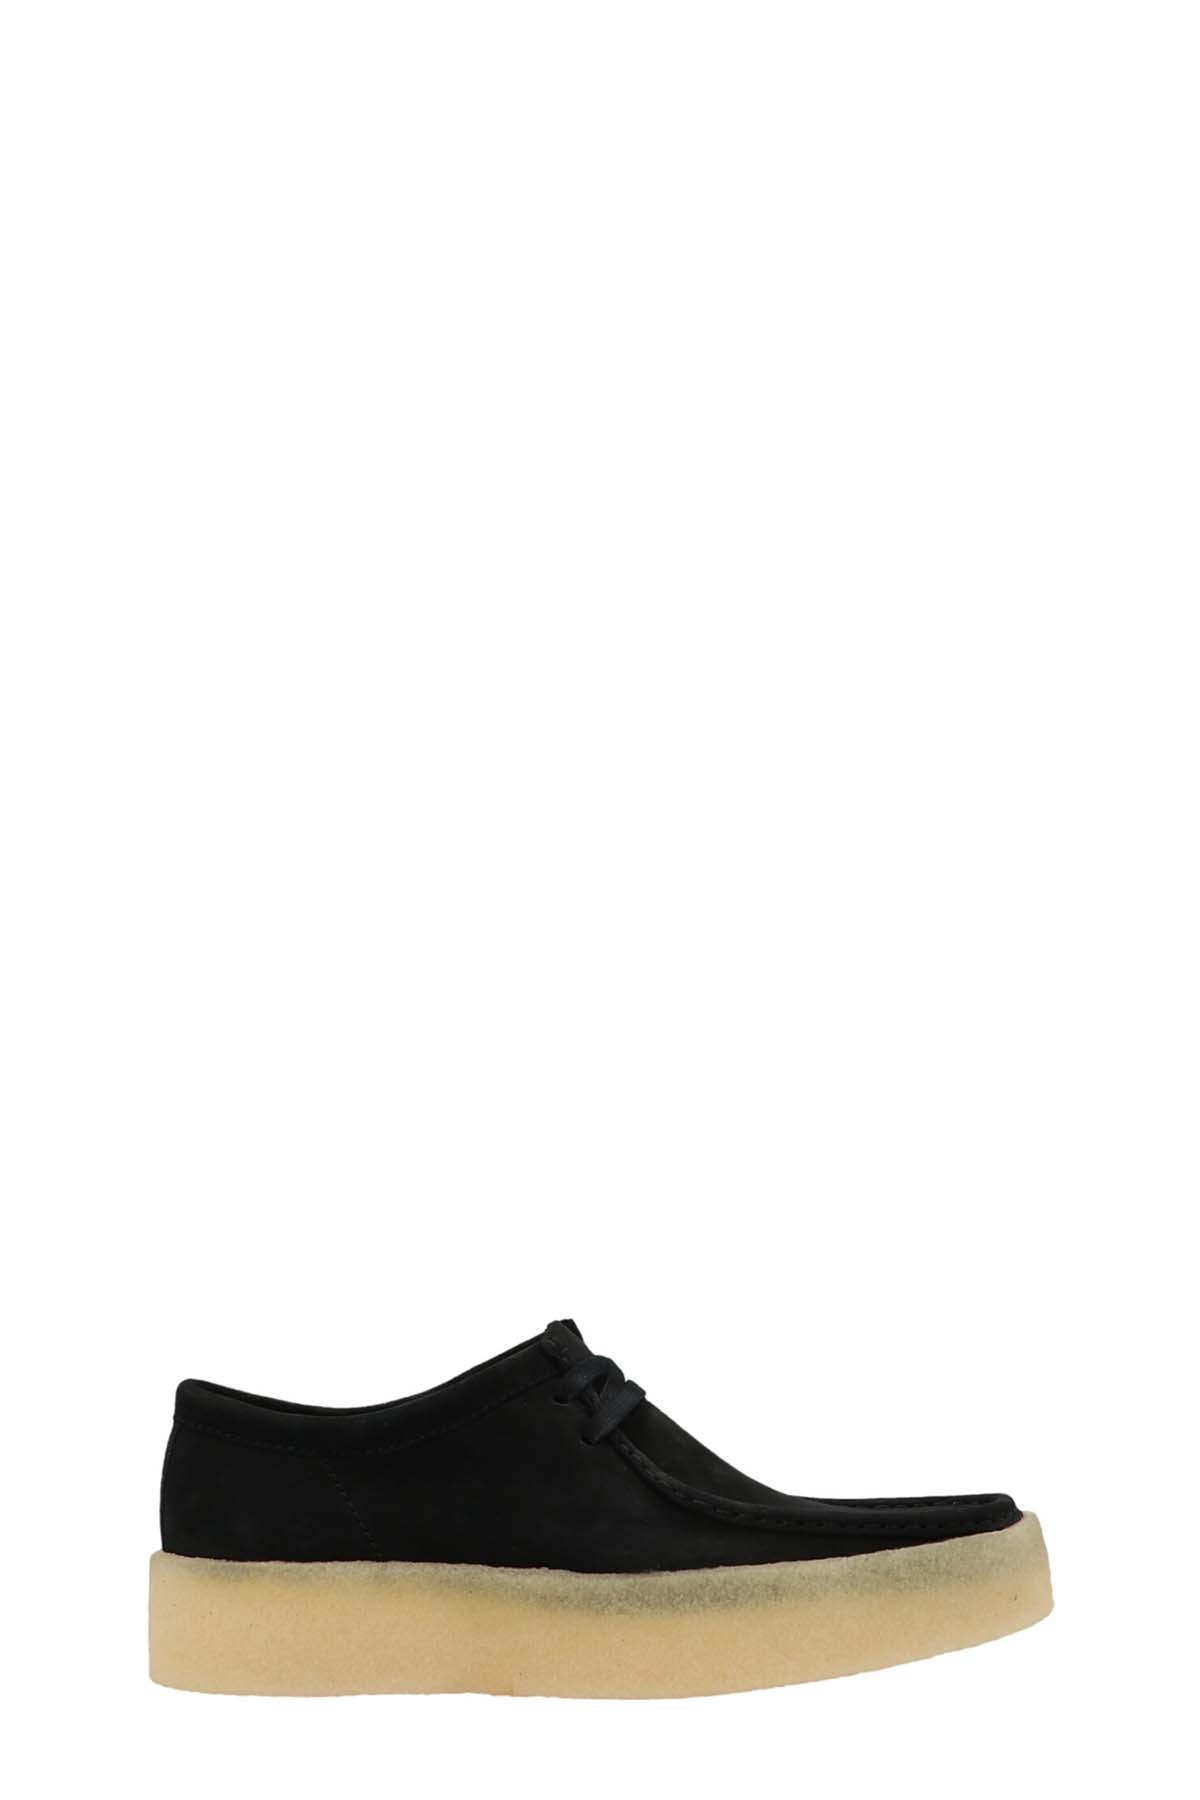 CLARKS ORIGINALS	 'Wallabee Cup' Lace-Up Ankle Boots